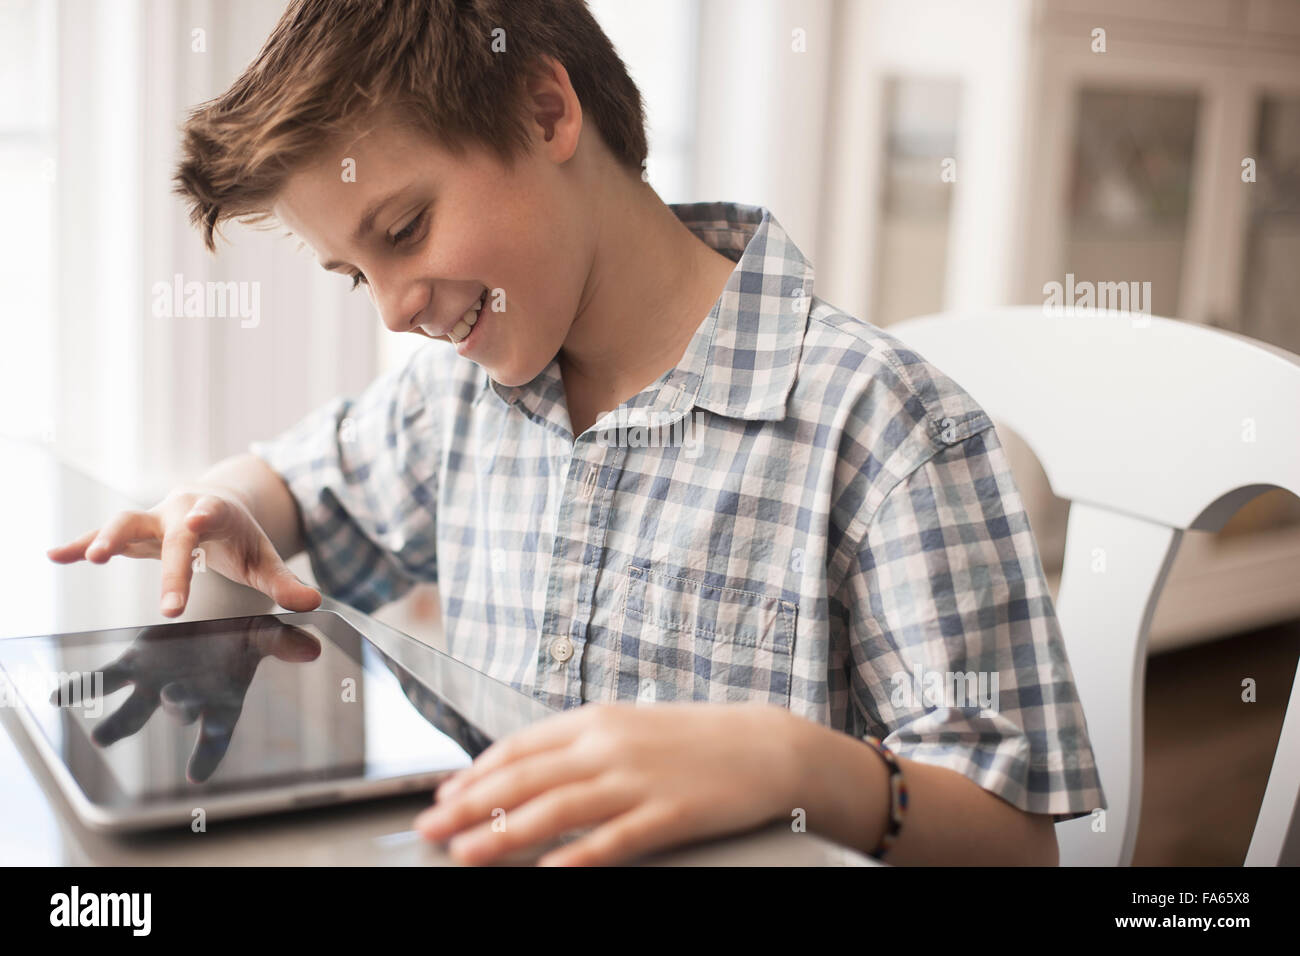 A boy seated at a table using a digital tablet, hand on the touch screen. Stock Photo